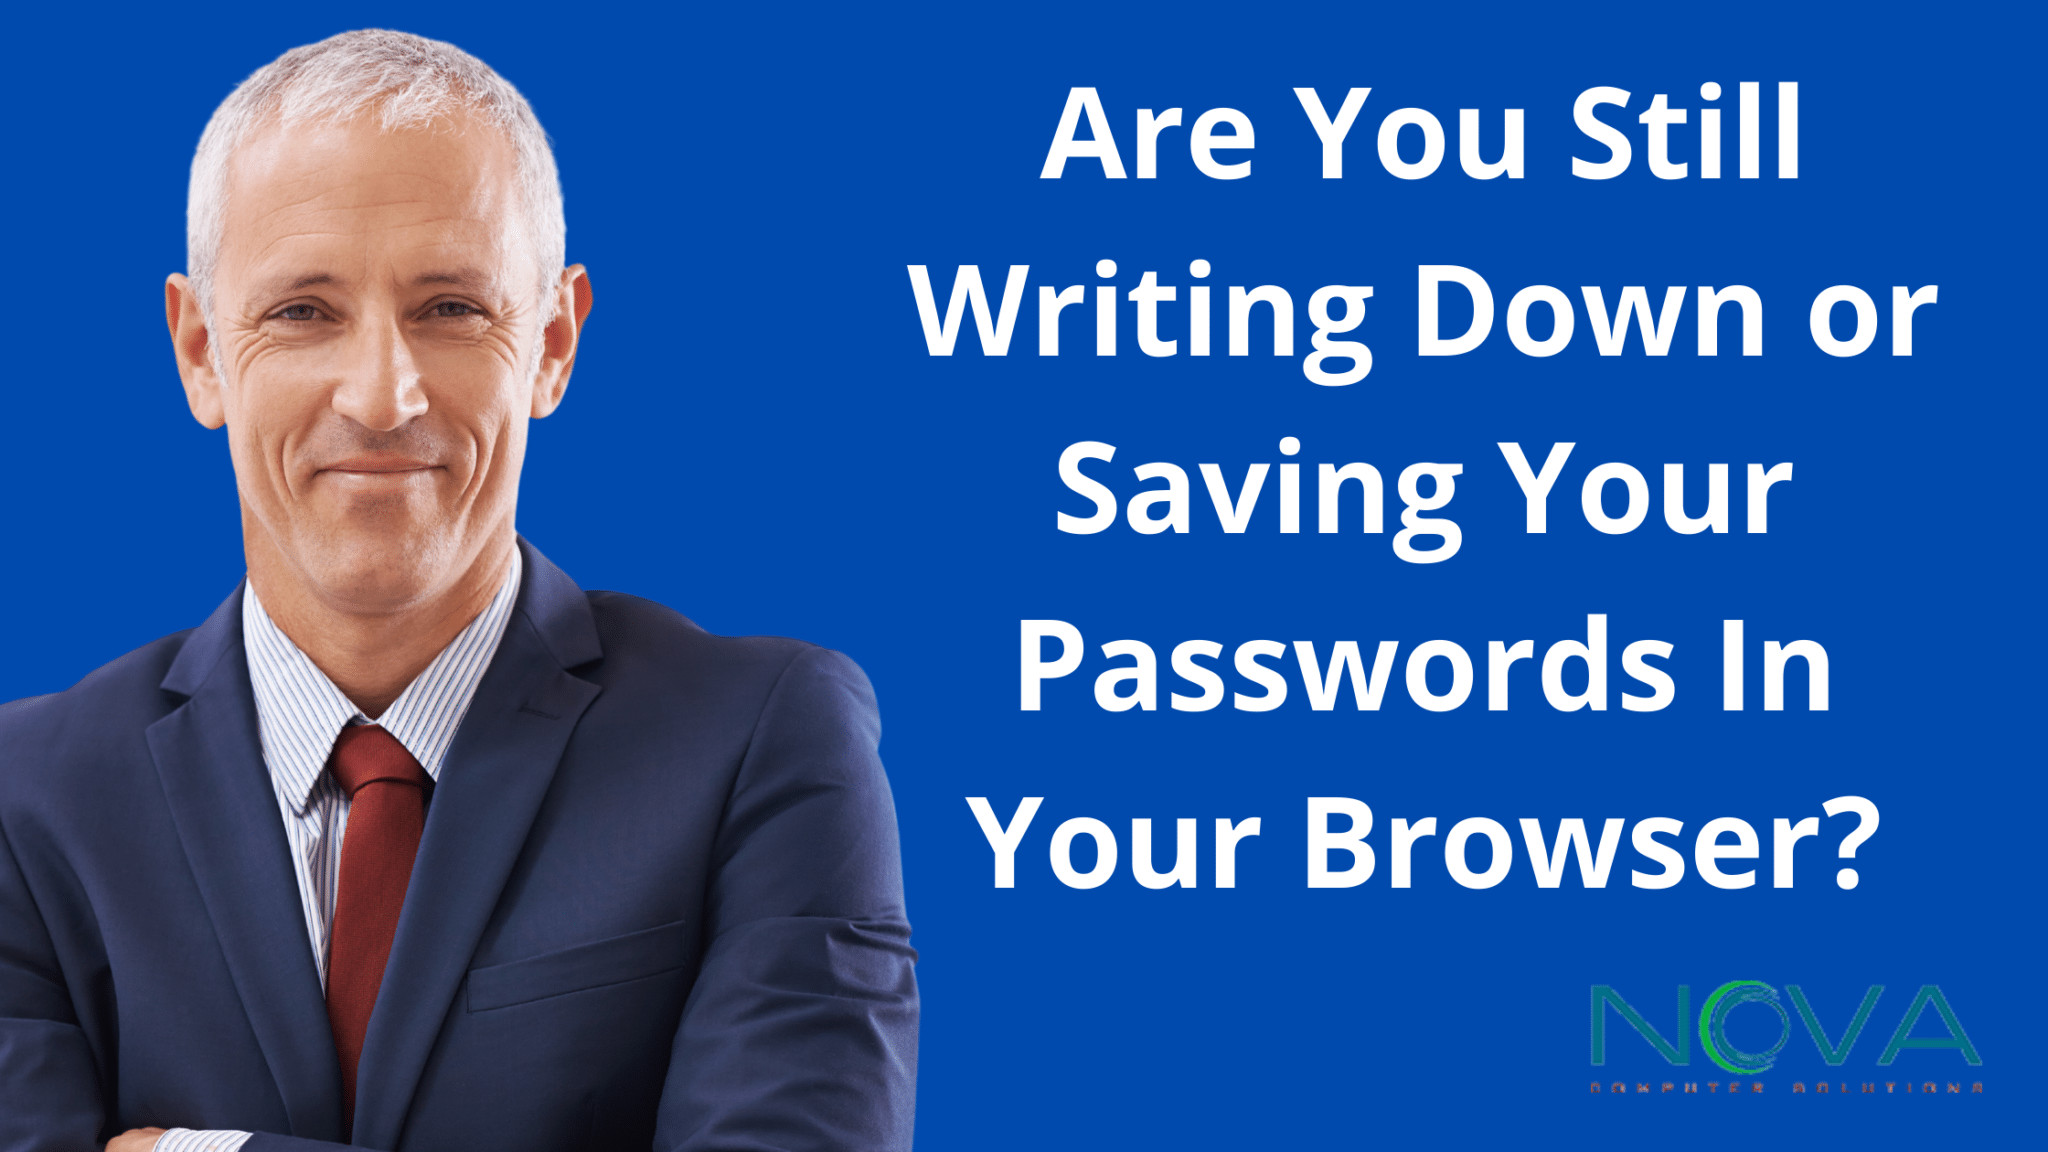 Are You Still Writing Down or Saving Your Passwords In Your Browser?